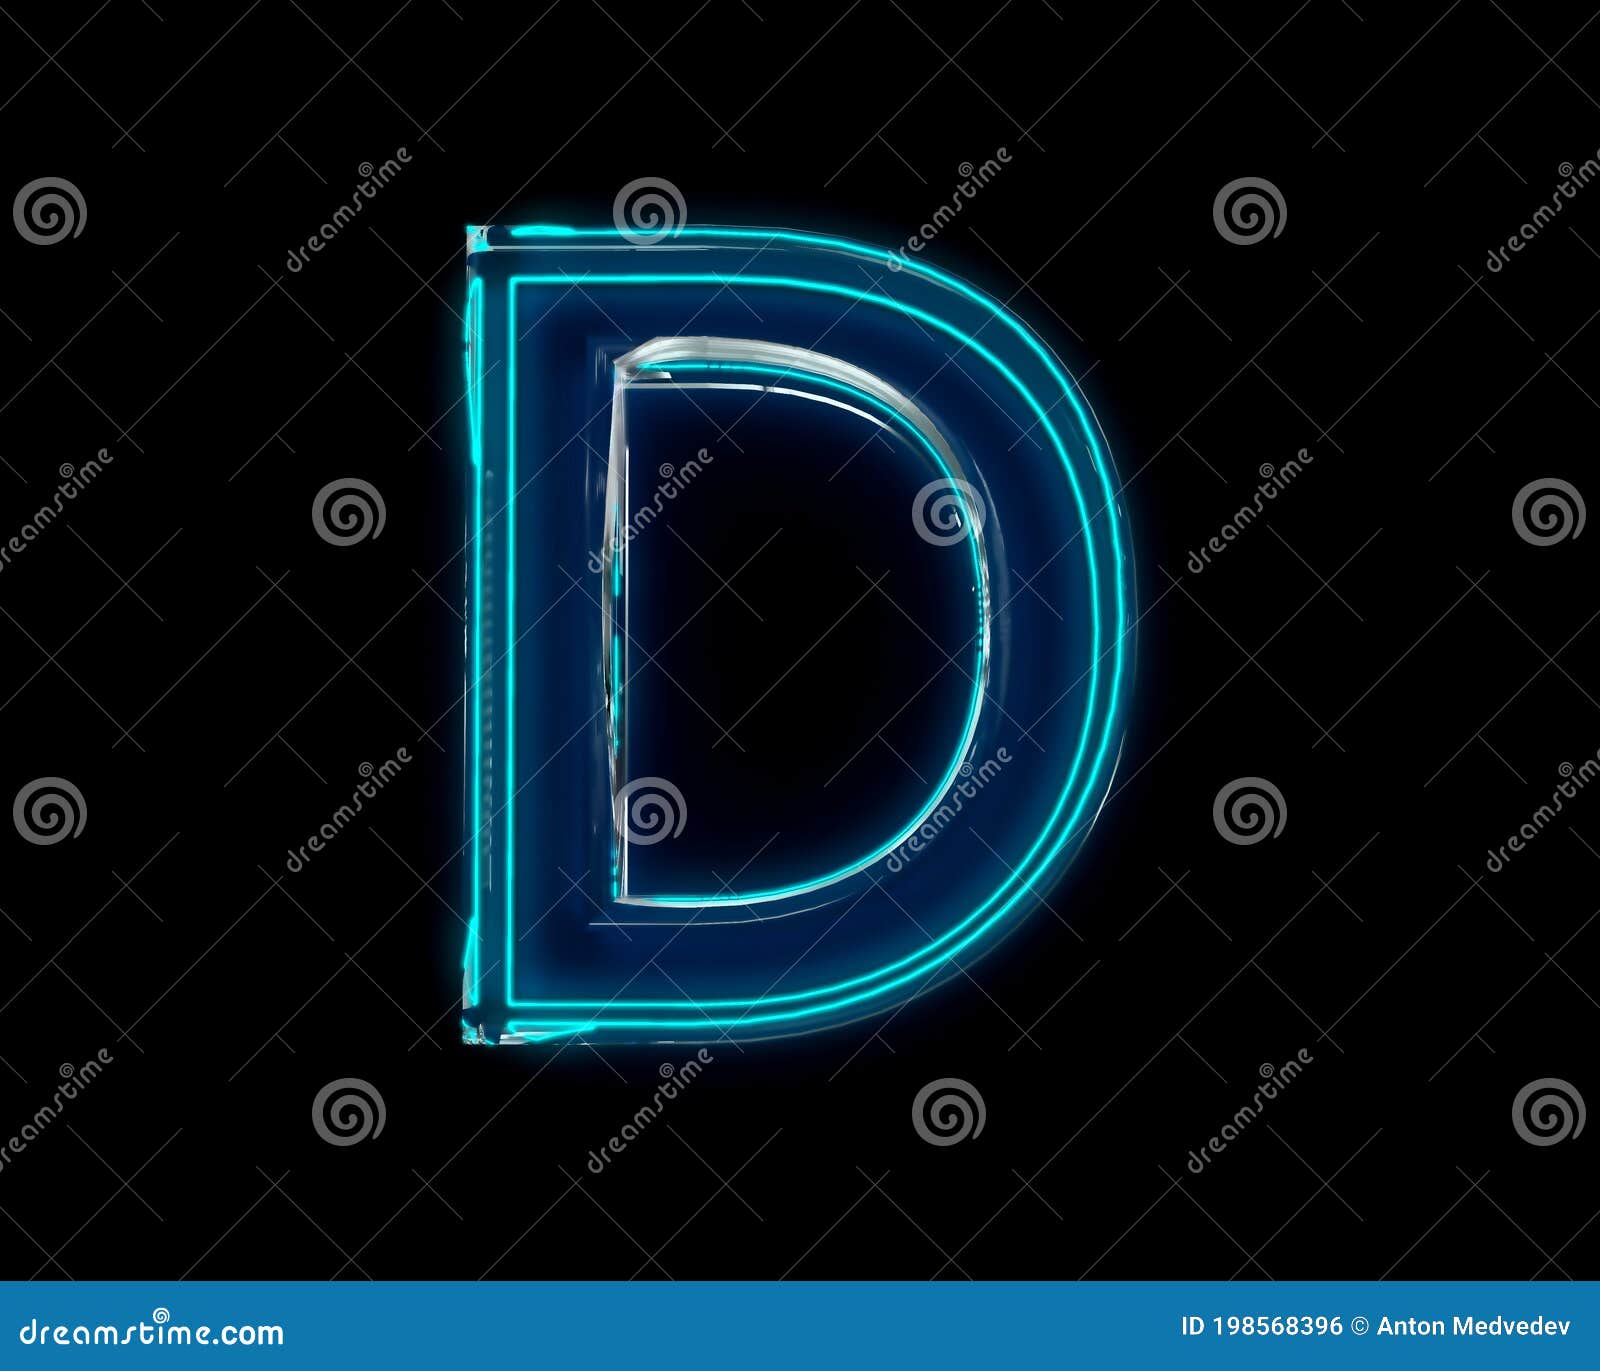 Blue Glossy Neon Light Glow Glassy Crystal Font - Letter D Isolated on ...